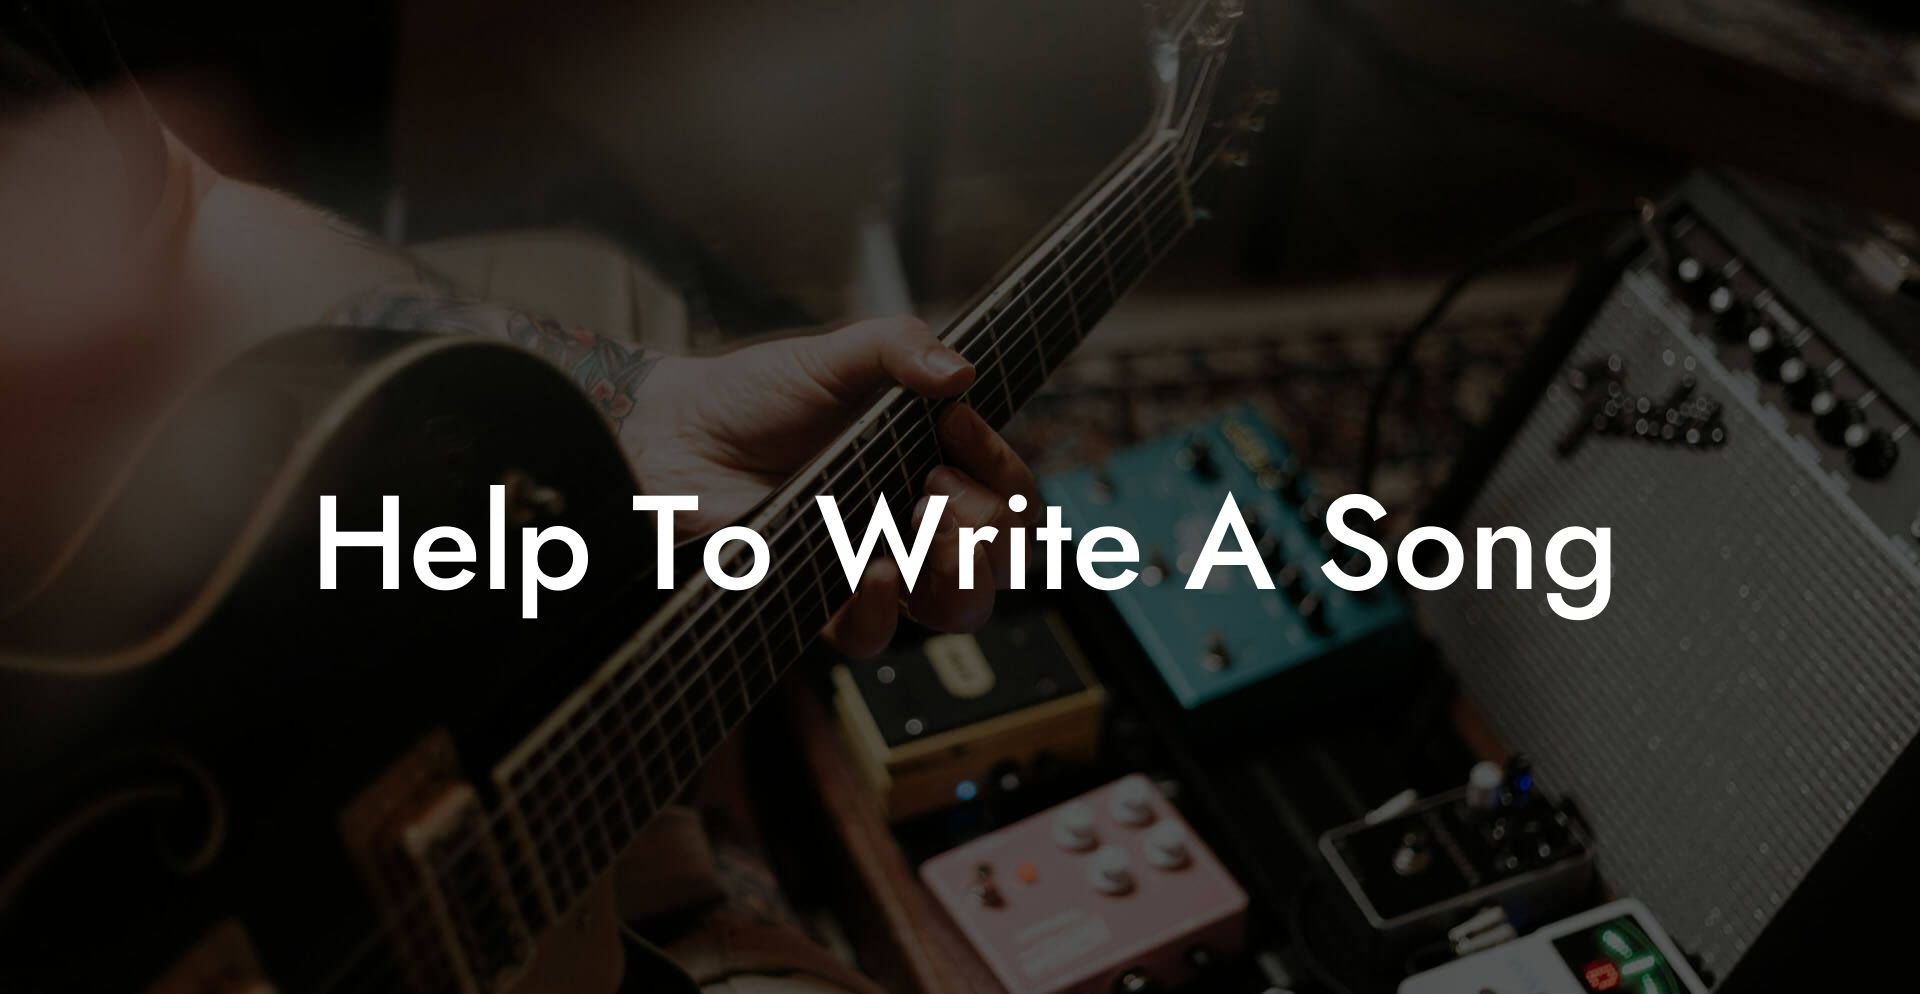 help to write a song lyric assistant